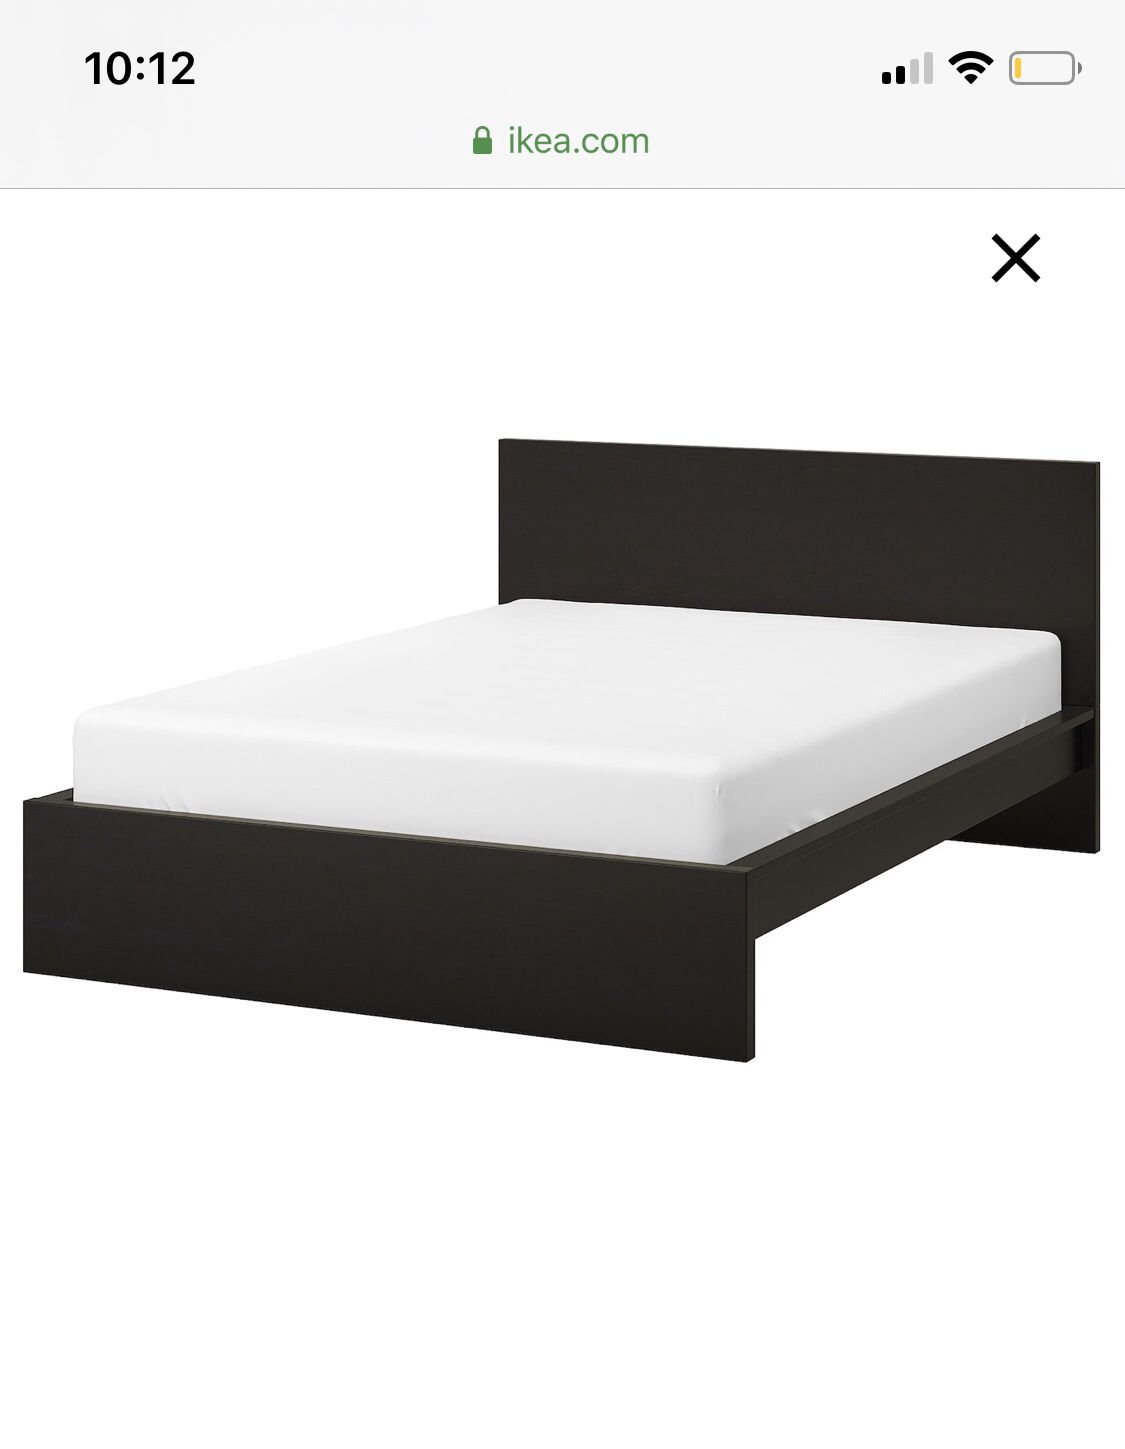 FREE Queen Bed Frame- Ikea - PENDING PICK UP